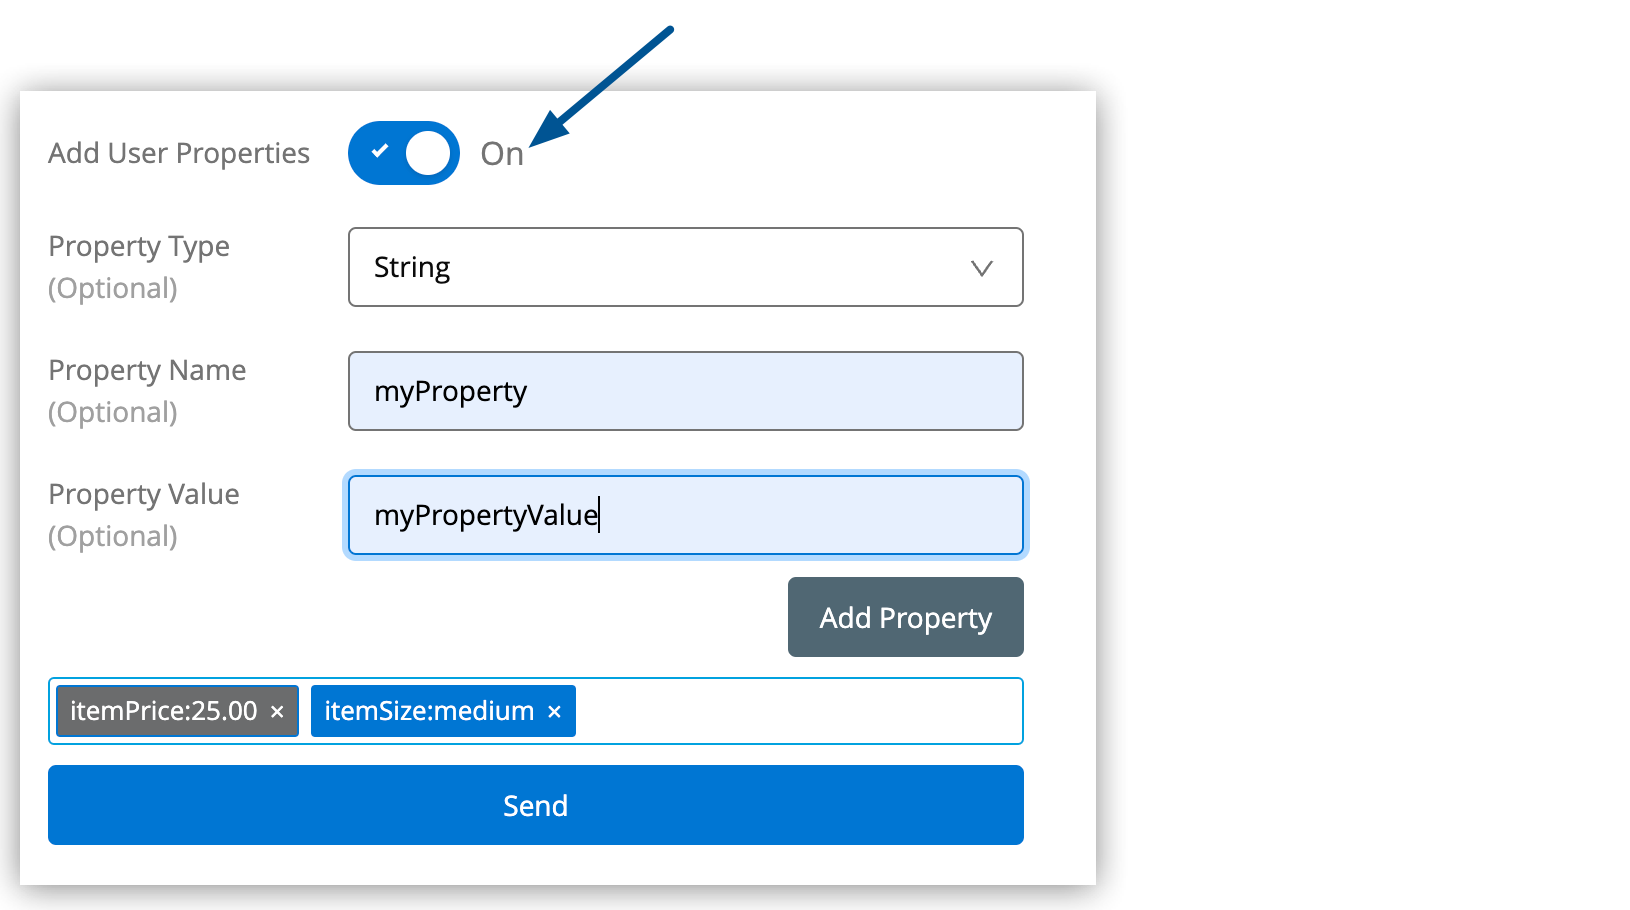 Add User Properties toggle in the Message Sender page